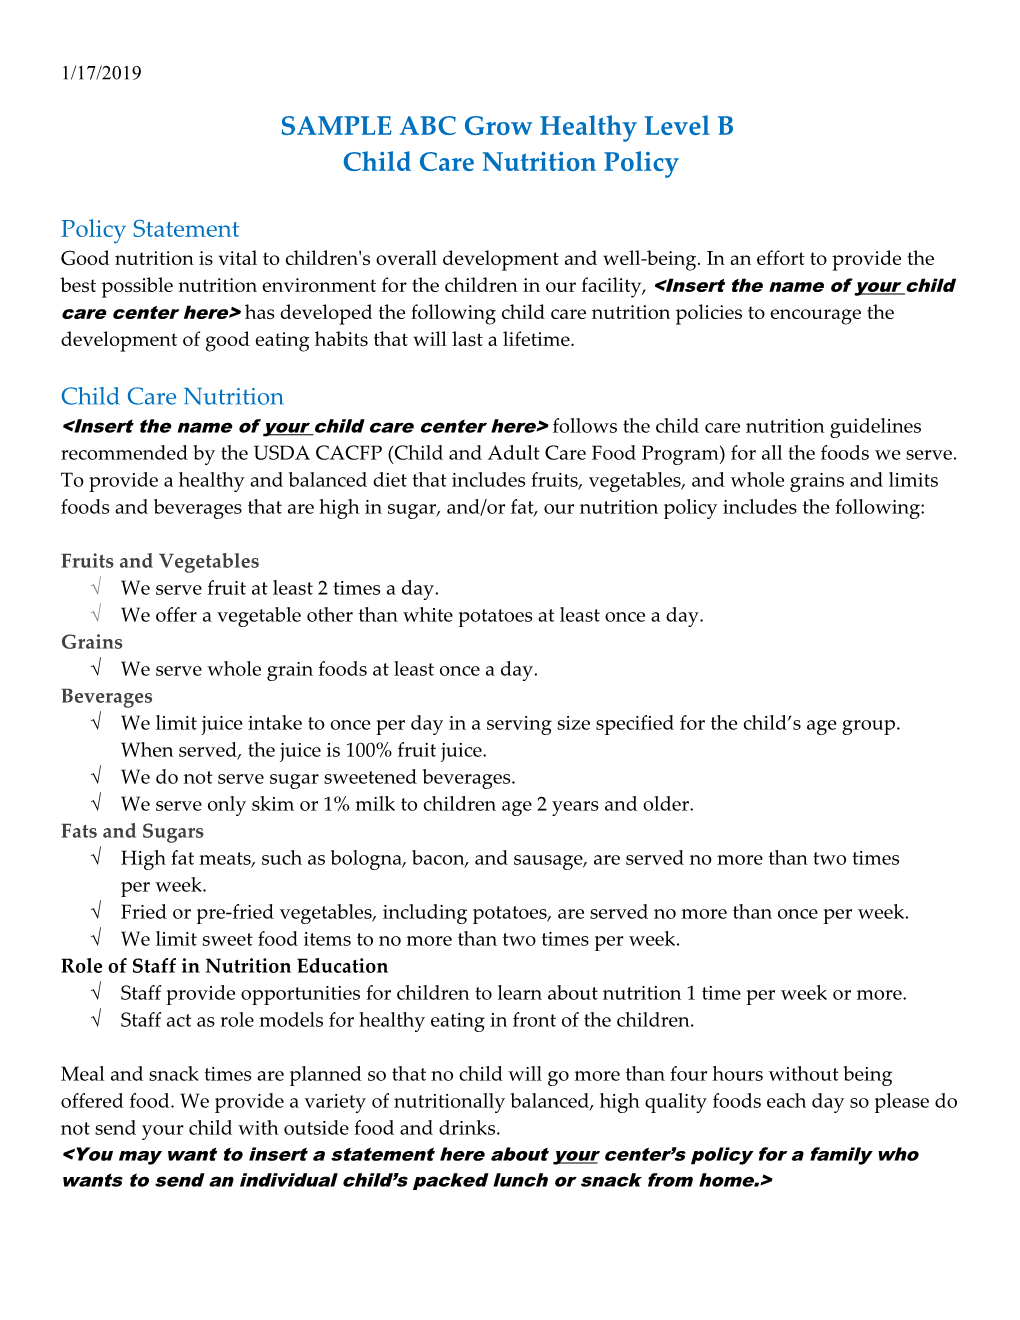 ABC Child Care Center Nutrition Policy